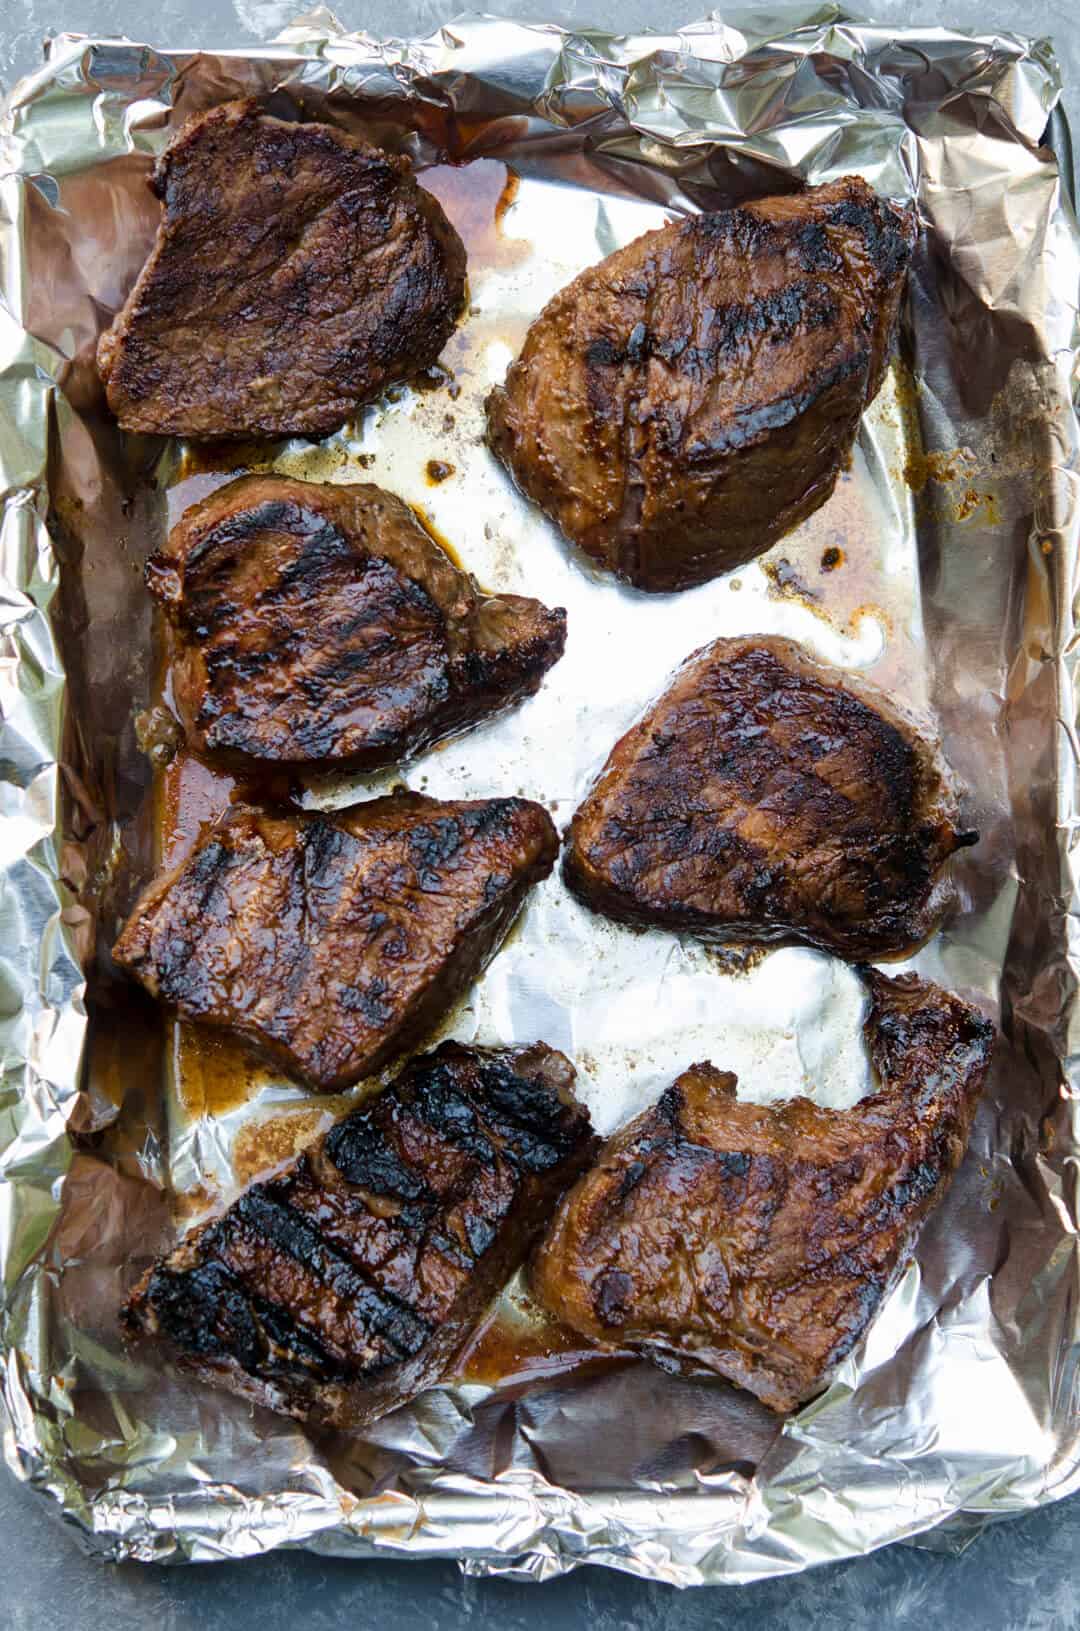 Marinated and grilled steak on a foil lined baking sheet shot from over the top.